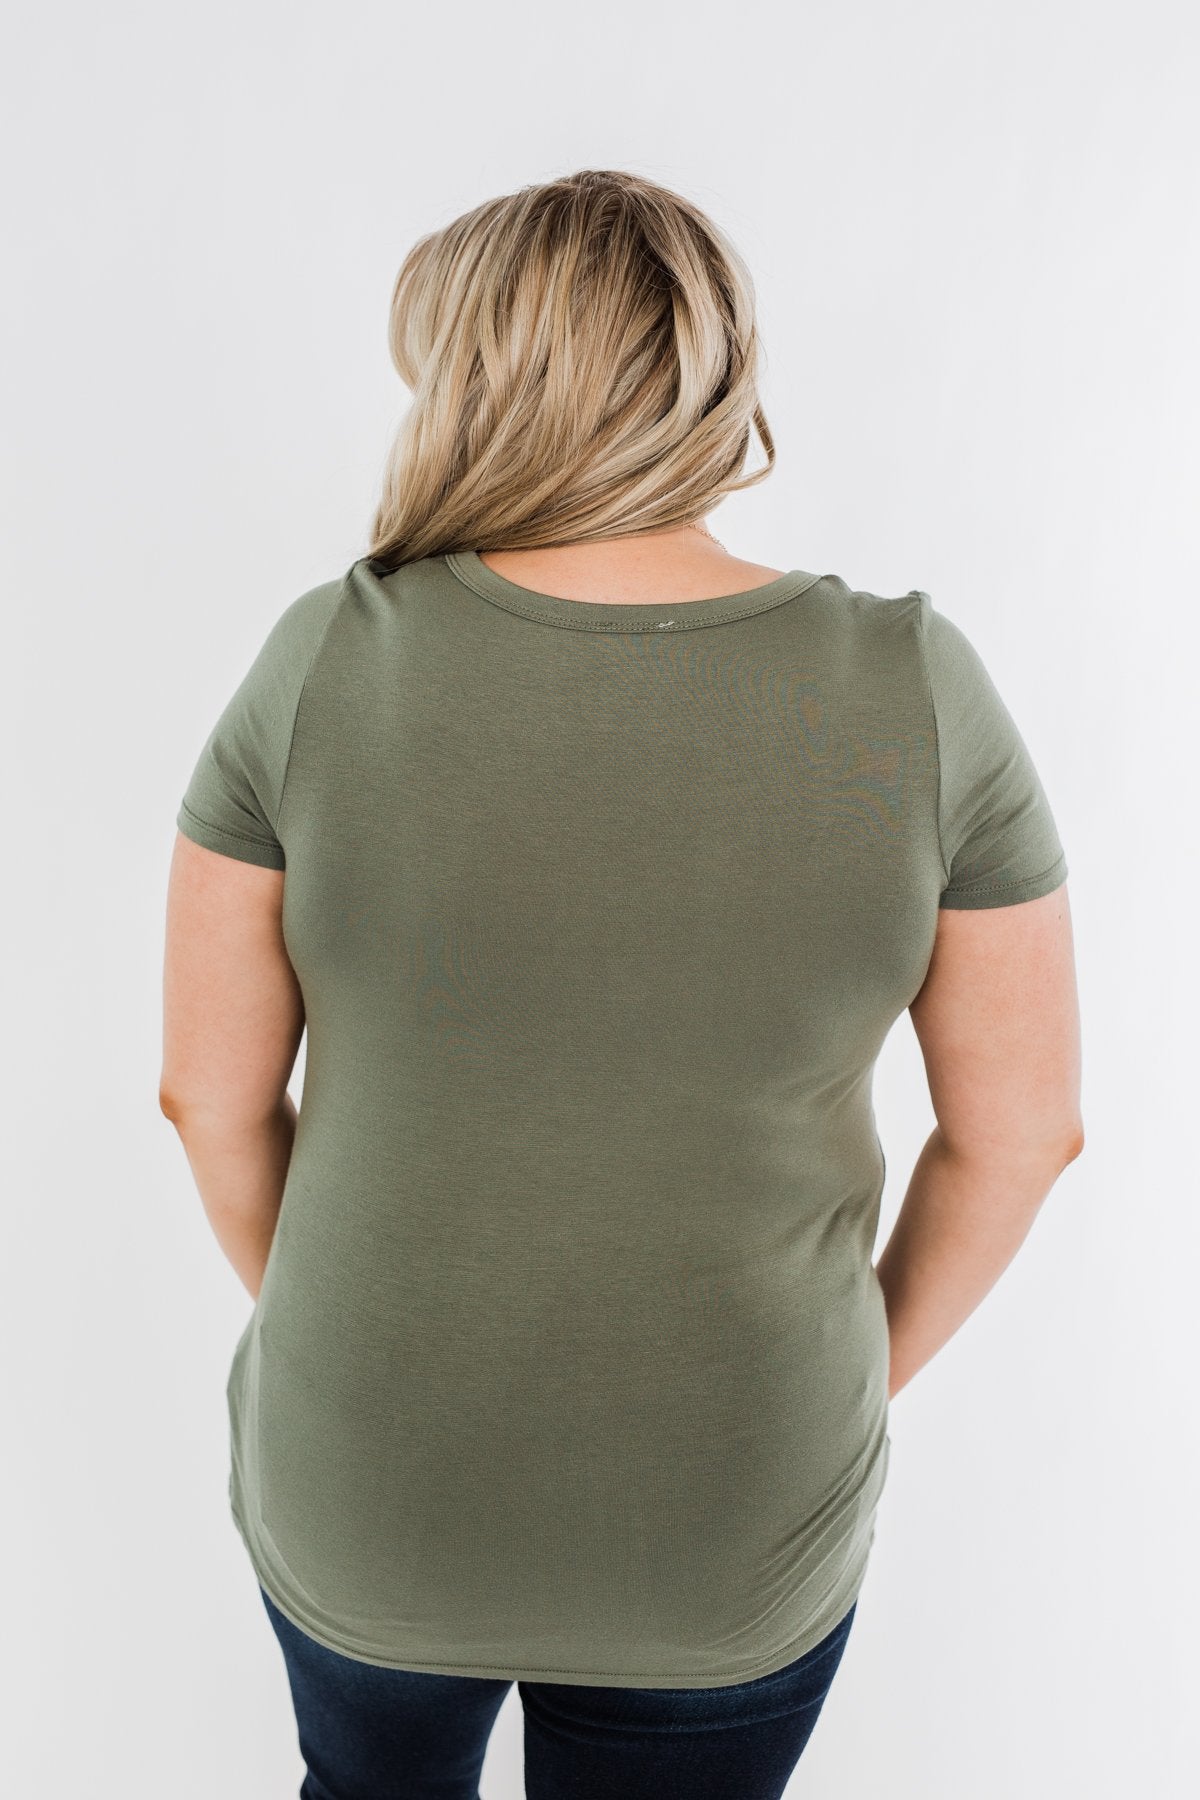 This is Me Notch Pocket Top- Olive